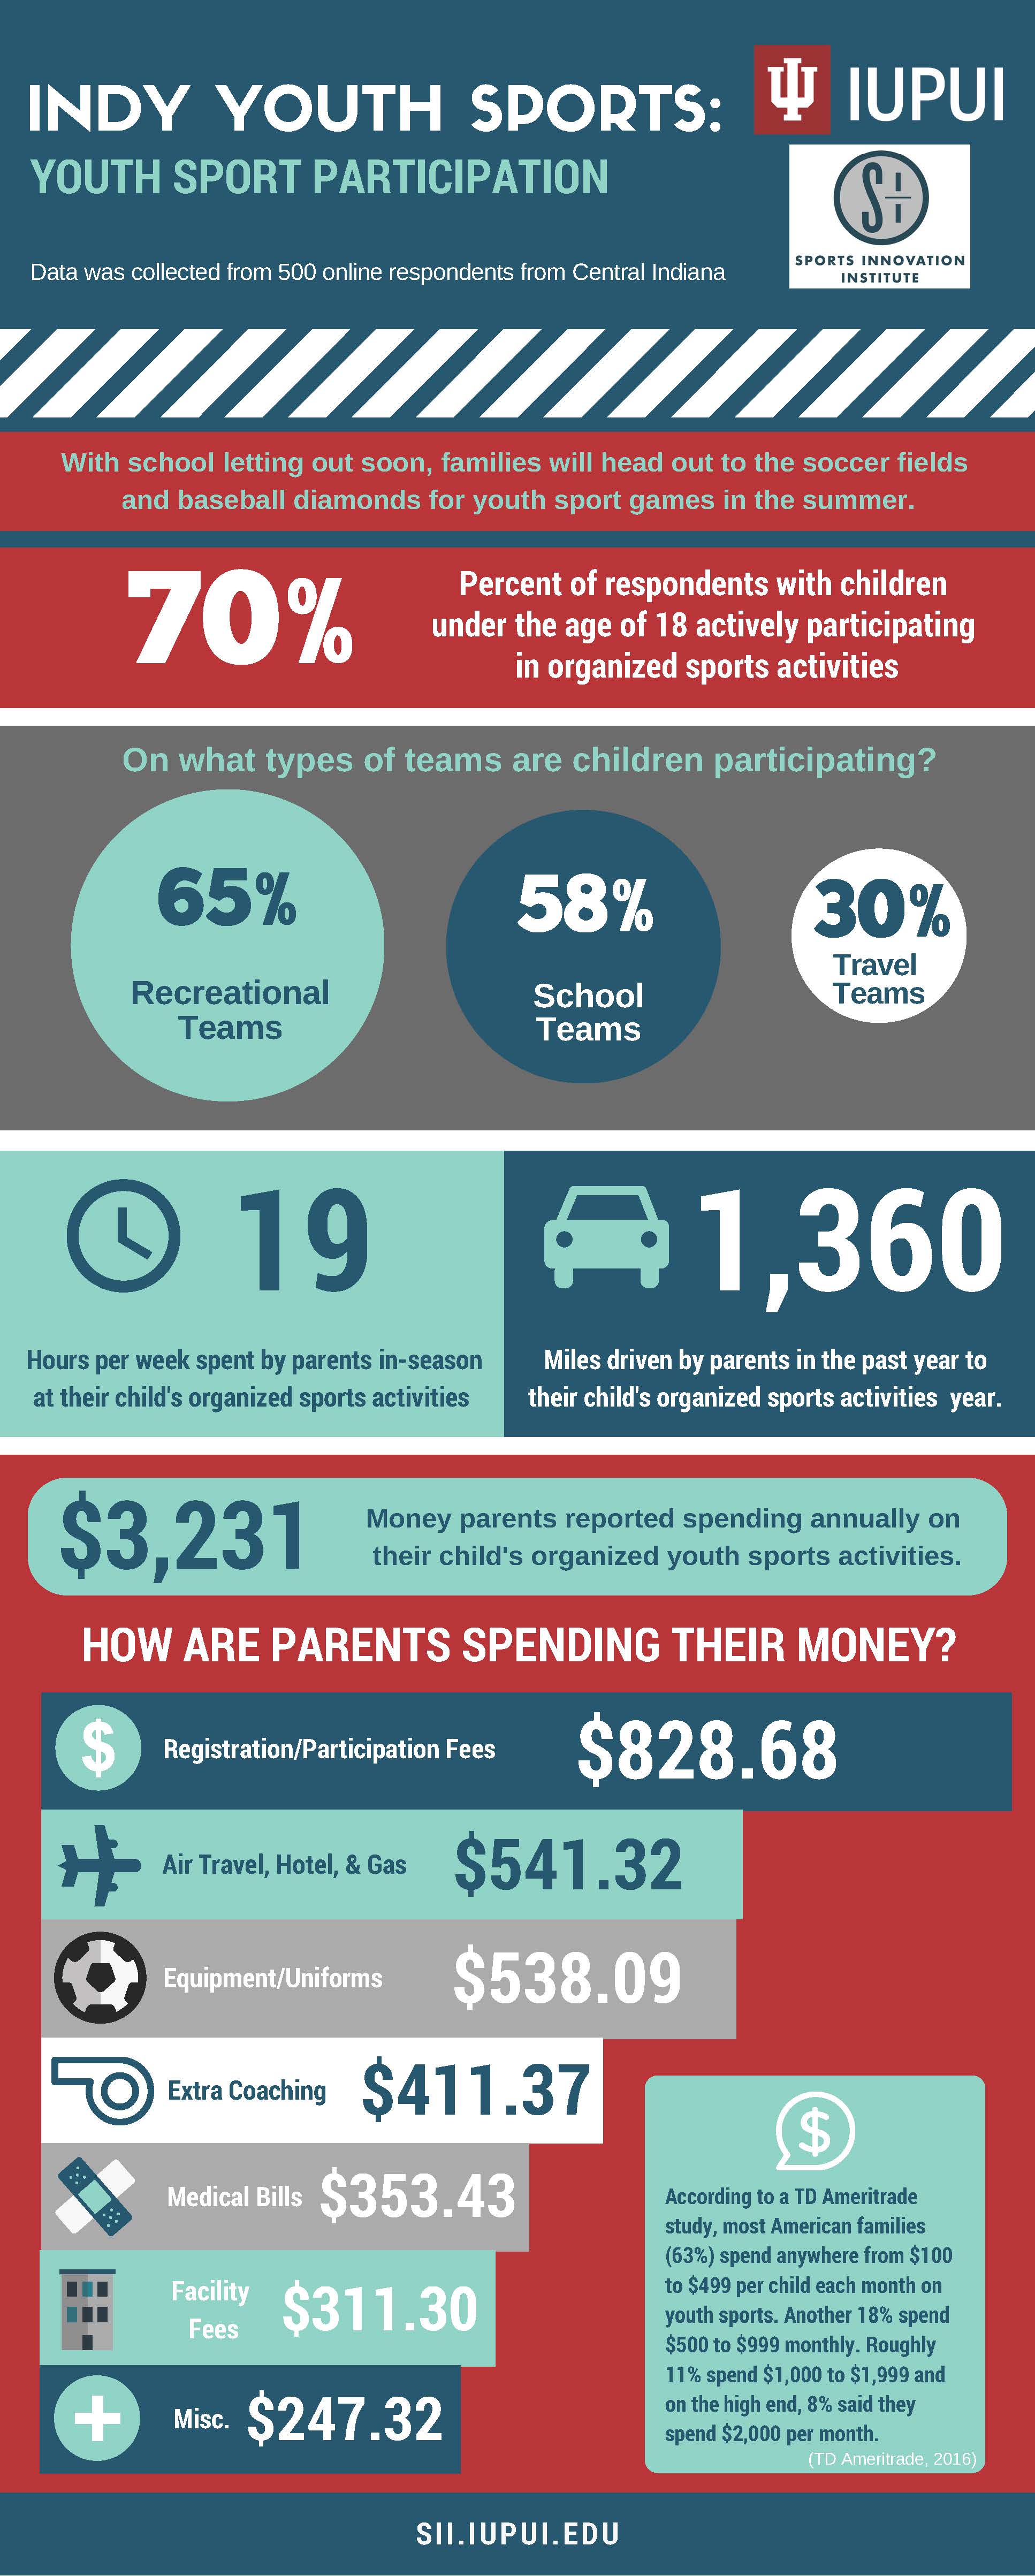 Indy youth sports infographic 